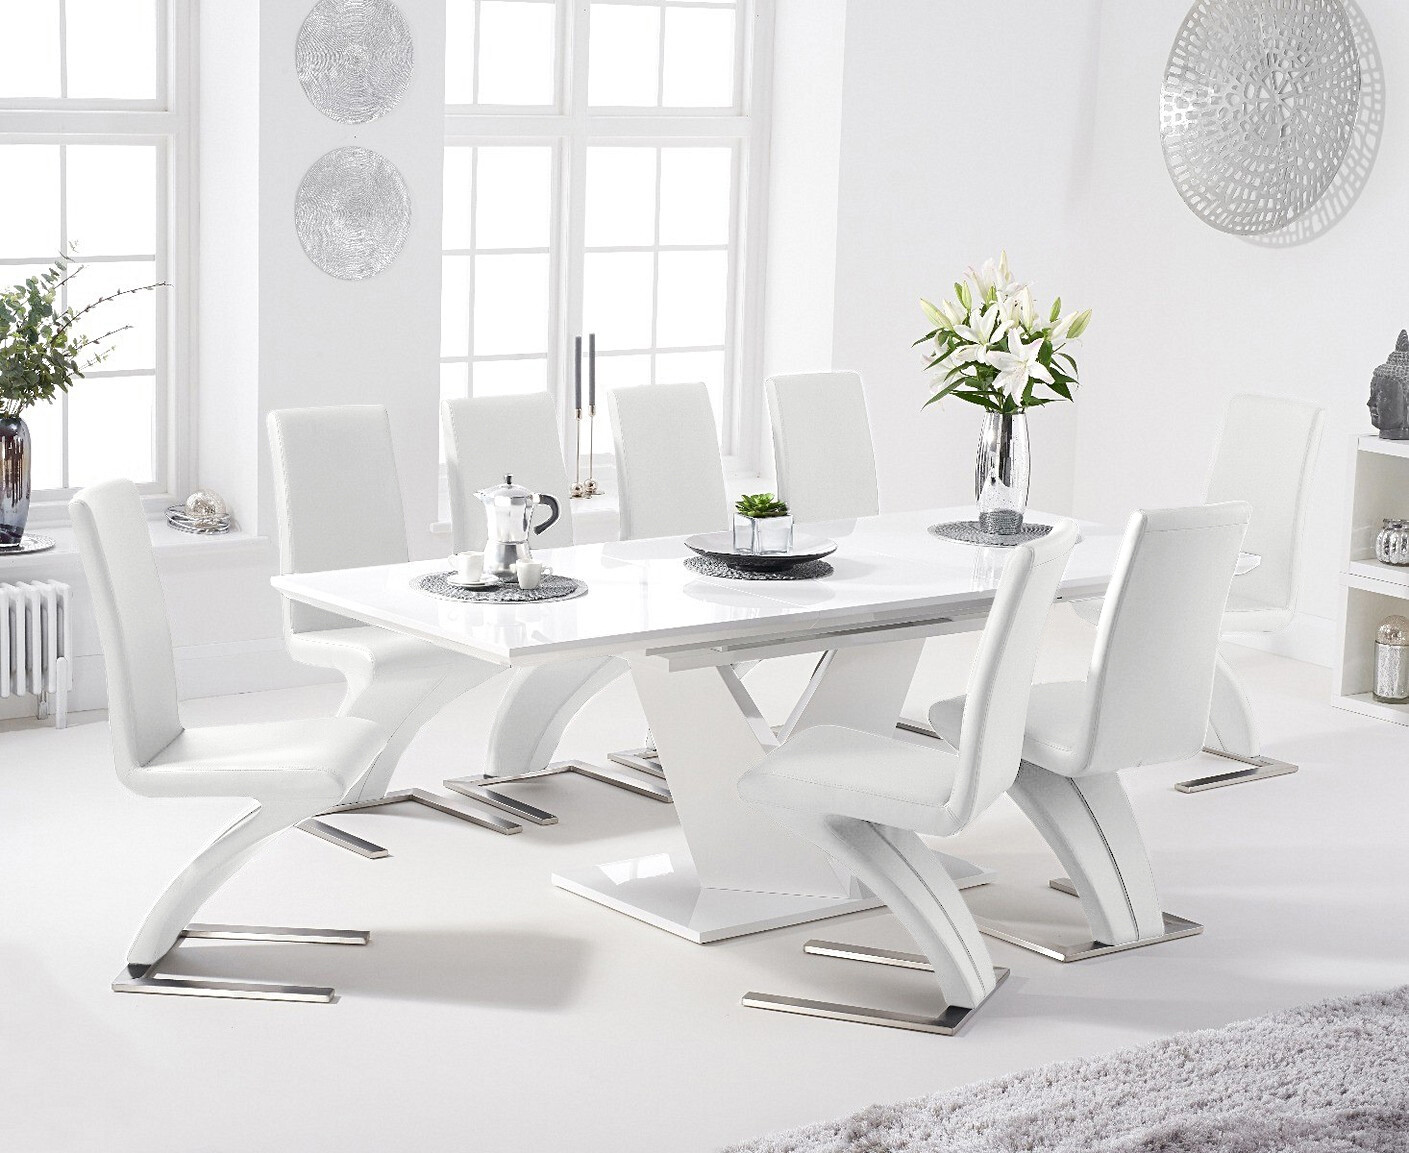 Extending Vittorio 160cm White High Gloss Dining Table With 6 White Aldo Faux Leather Chairs